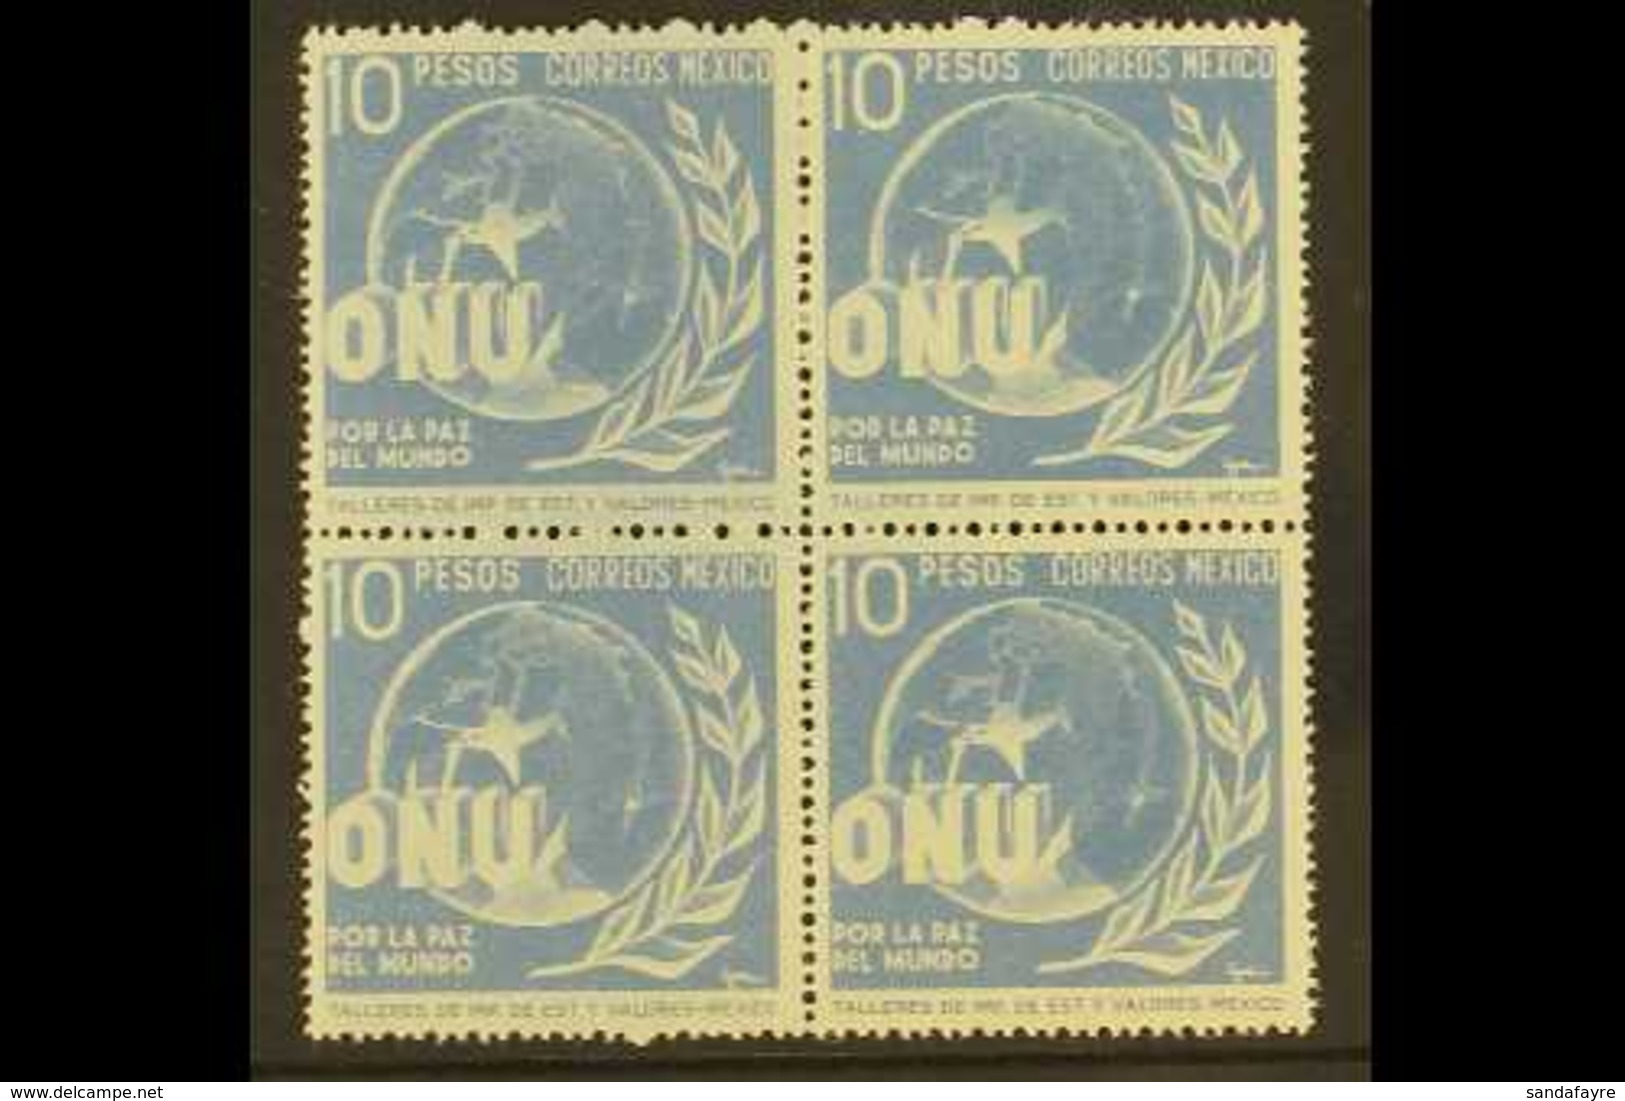 1946 10 Peso Ultramarine "United Nations", SG 771, Scott 818, Never Hinged Mint Block Of 4 (4 Stamps) For More Images, P - Mexiko